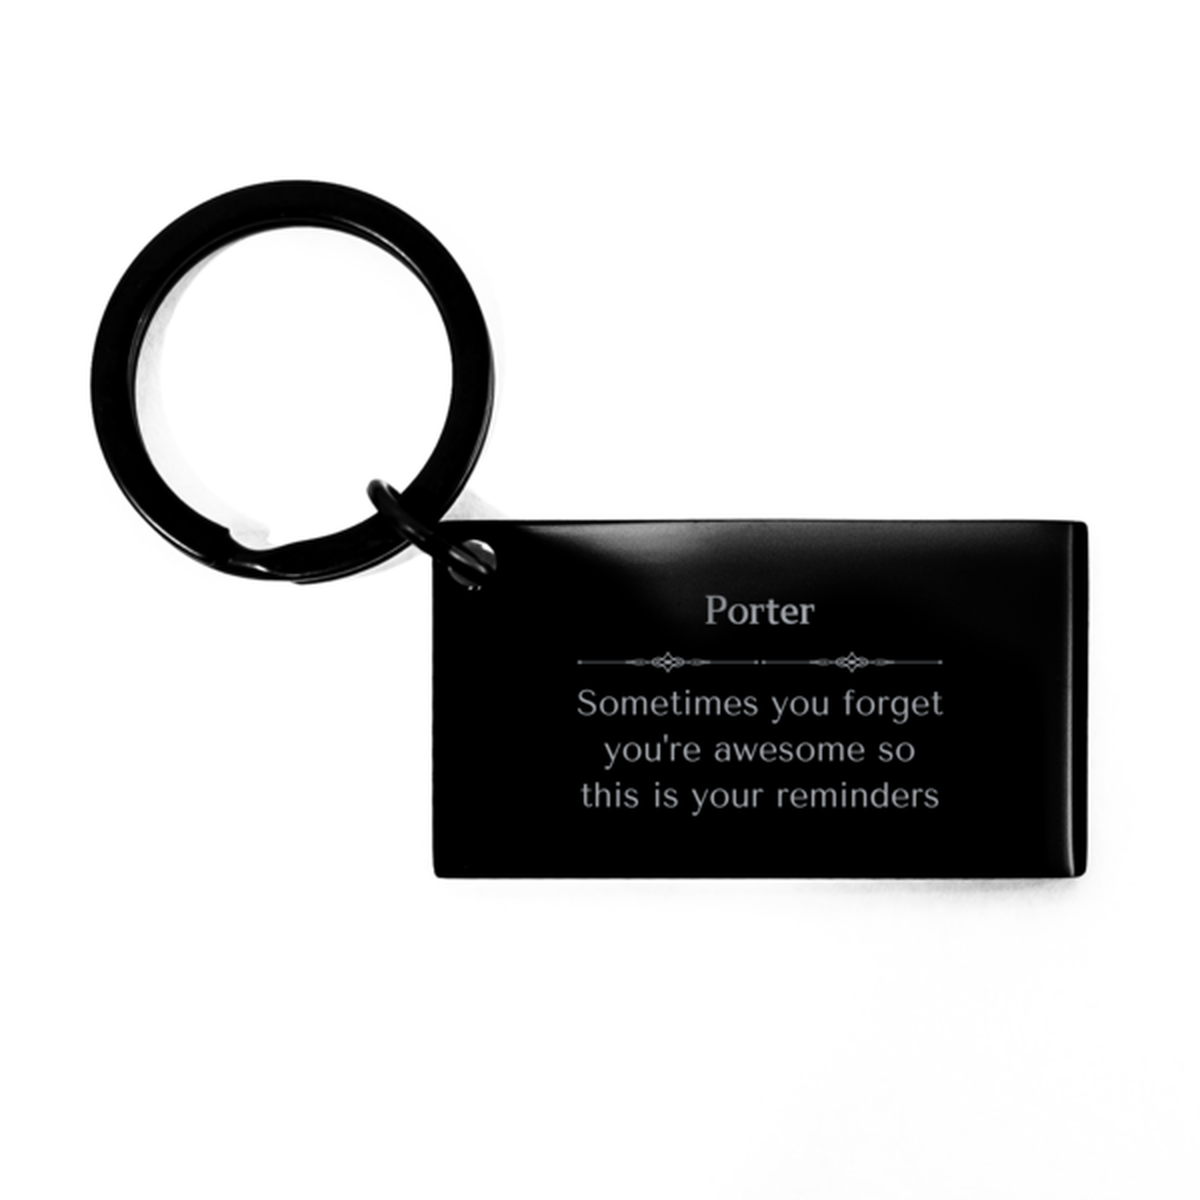 Sentimental Porter Keychain, Securities Trader Sometimes you forget you're awesome so this is your reminders, Graduation Christmas Birthday Gifts for Porter, Men, Women, Coworkers